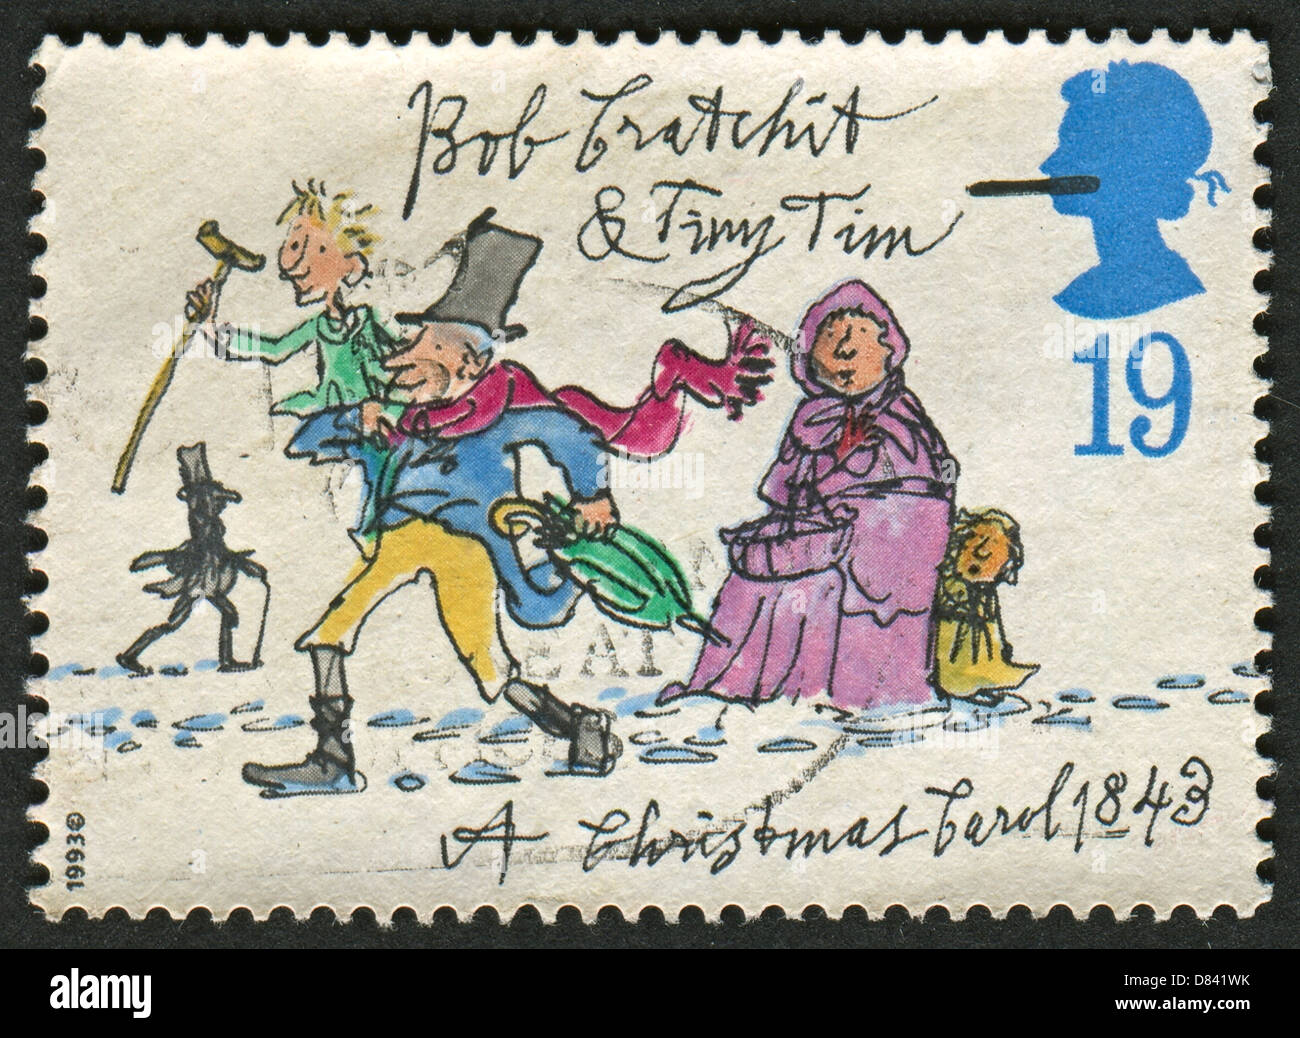 UK - CIRCA 1993: A stamp printed in UK shows image of the Bob Cratchit and Tiny Tim , circa 1993. Stock Photo